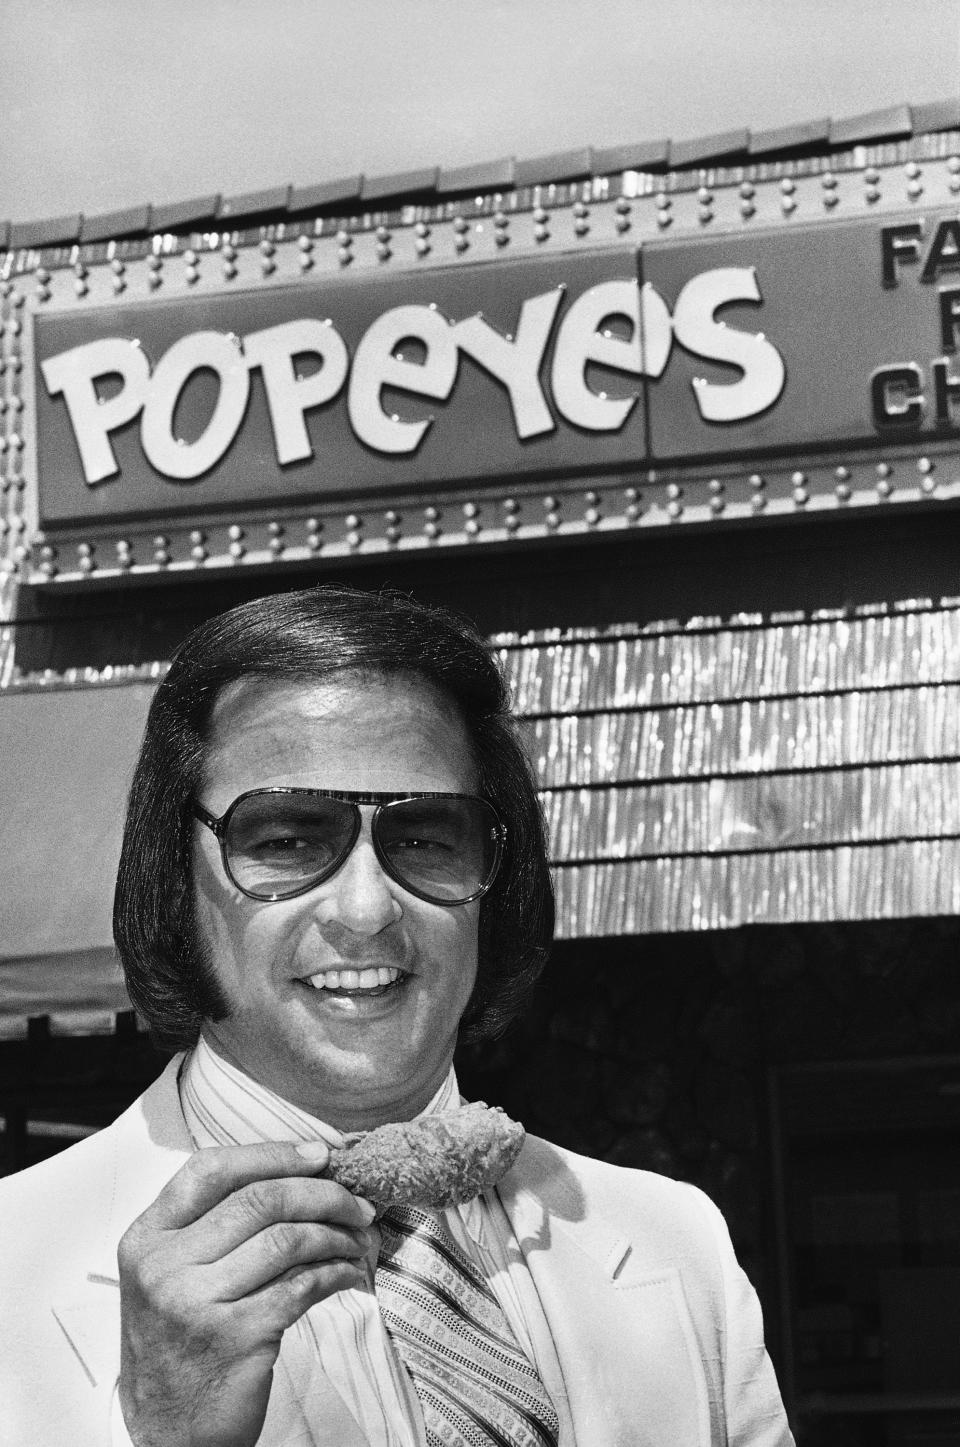 FILE - Popeyes founder Al Copeland holds a piece of his fried chicken outside one of his 34 fast food outlets in New Orleans on June 20, 1979. A new book, “Secrets of a Tastemaker: Al Copeland, The Cookbook," released last month, helped mark the 50th anniversary of Popeyes Famous Fried Chicken. (AP Photo, File)